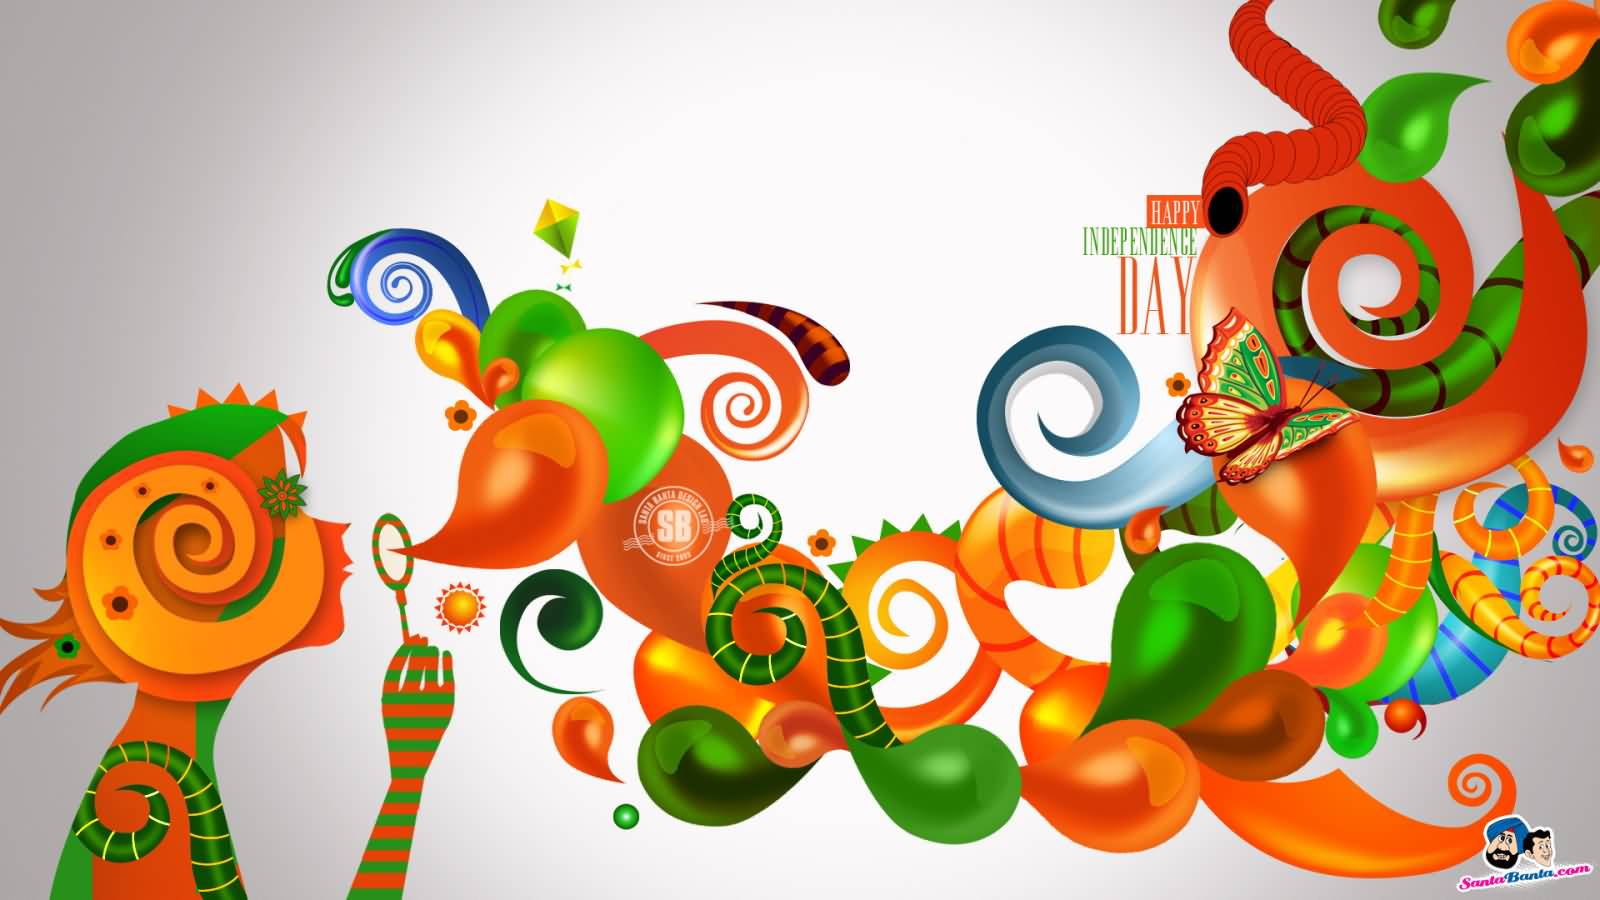 Happy Independence Day Colorful Bubbles Wallpaper